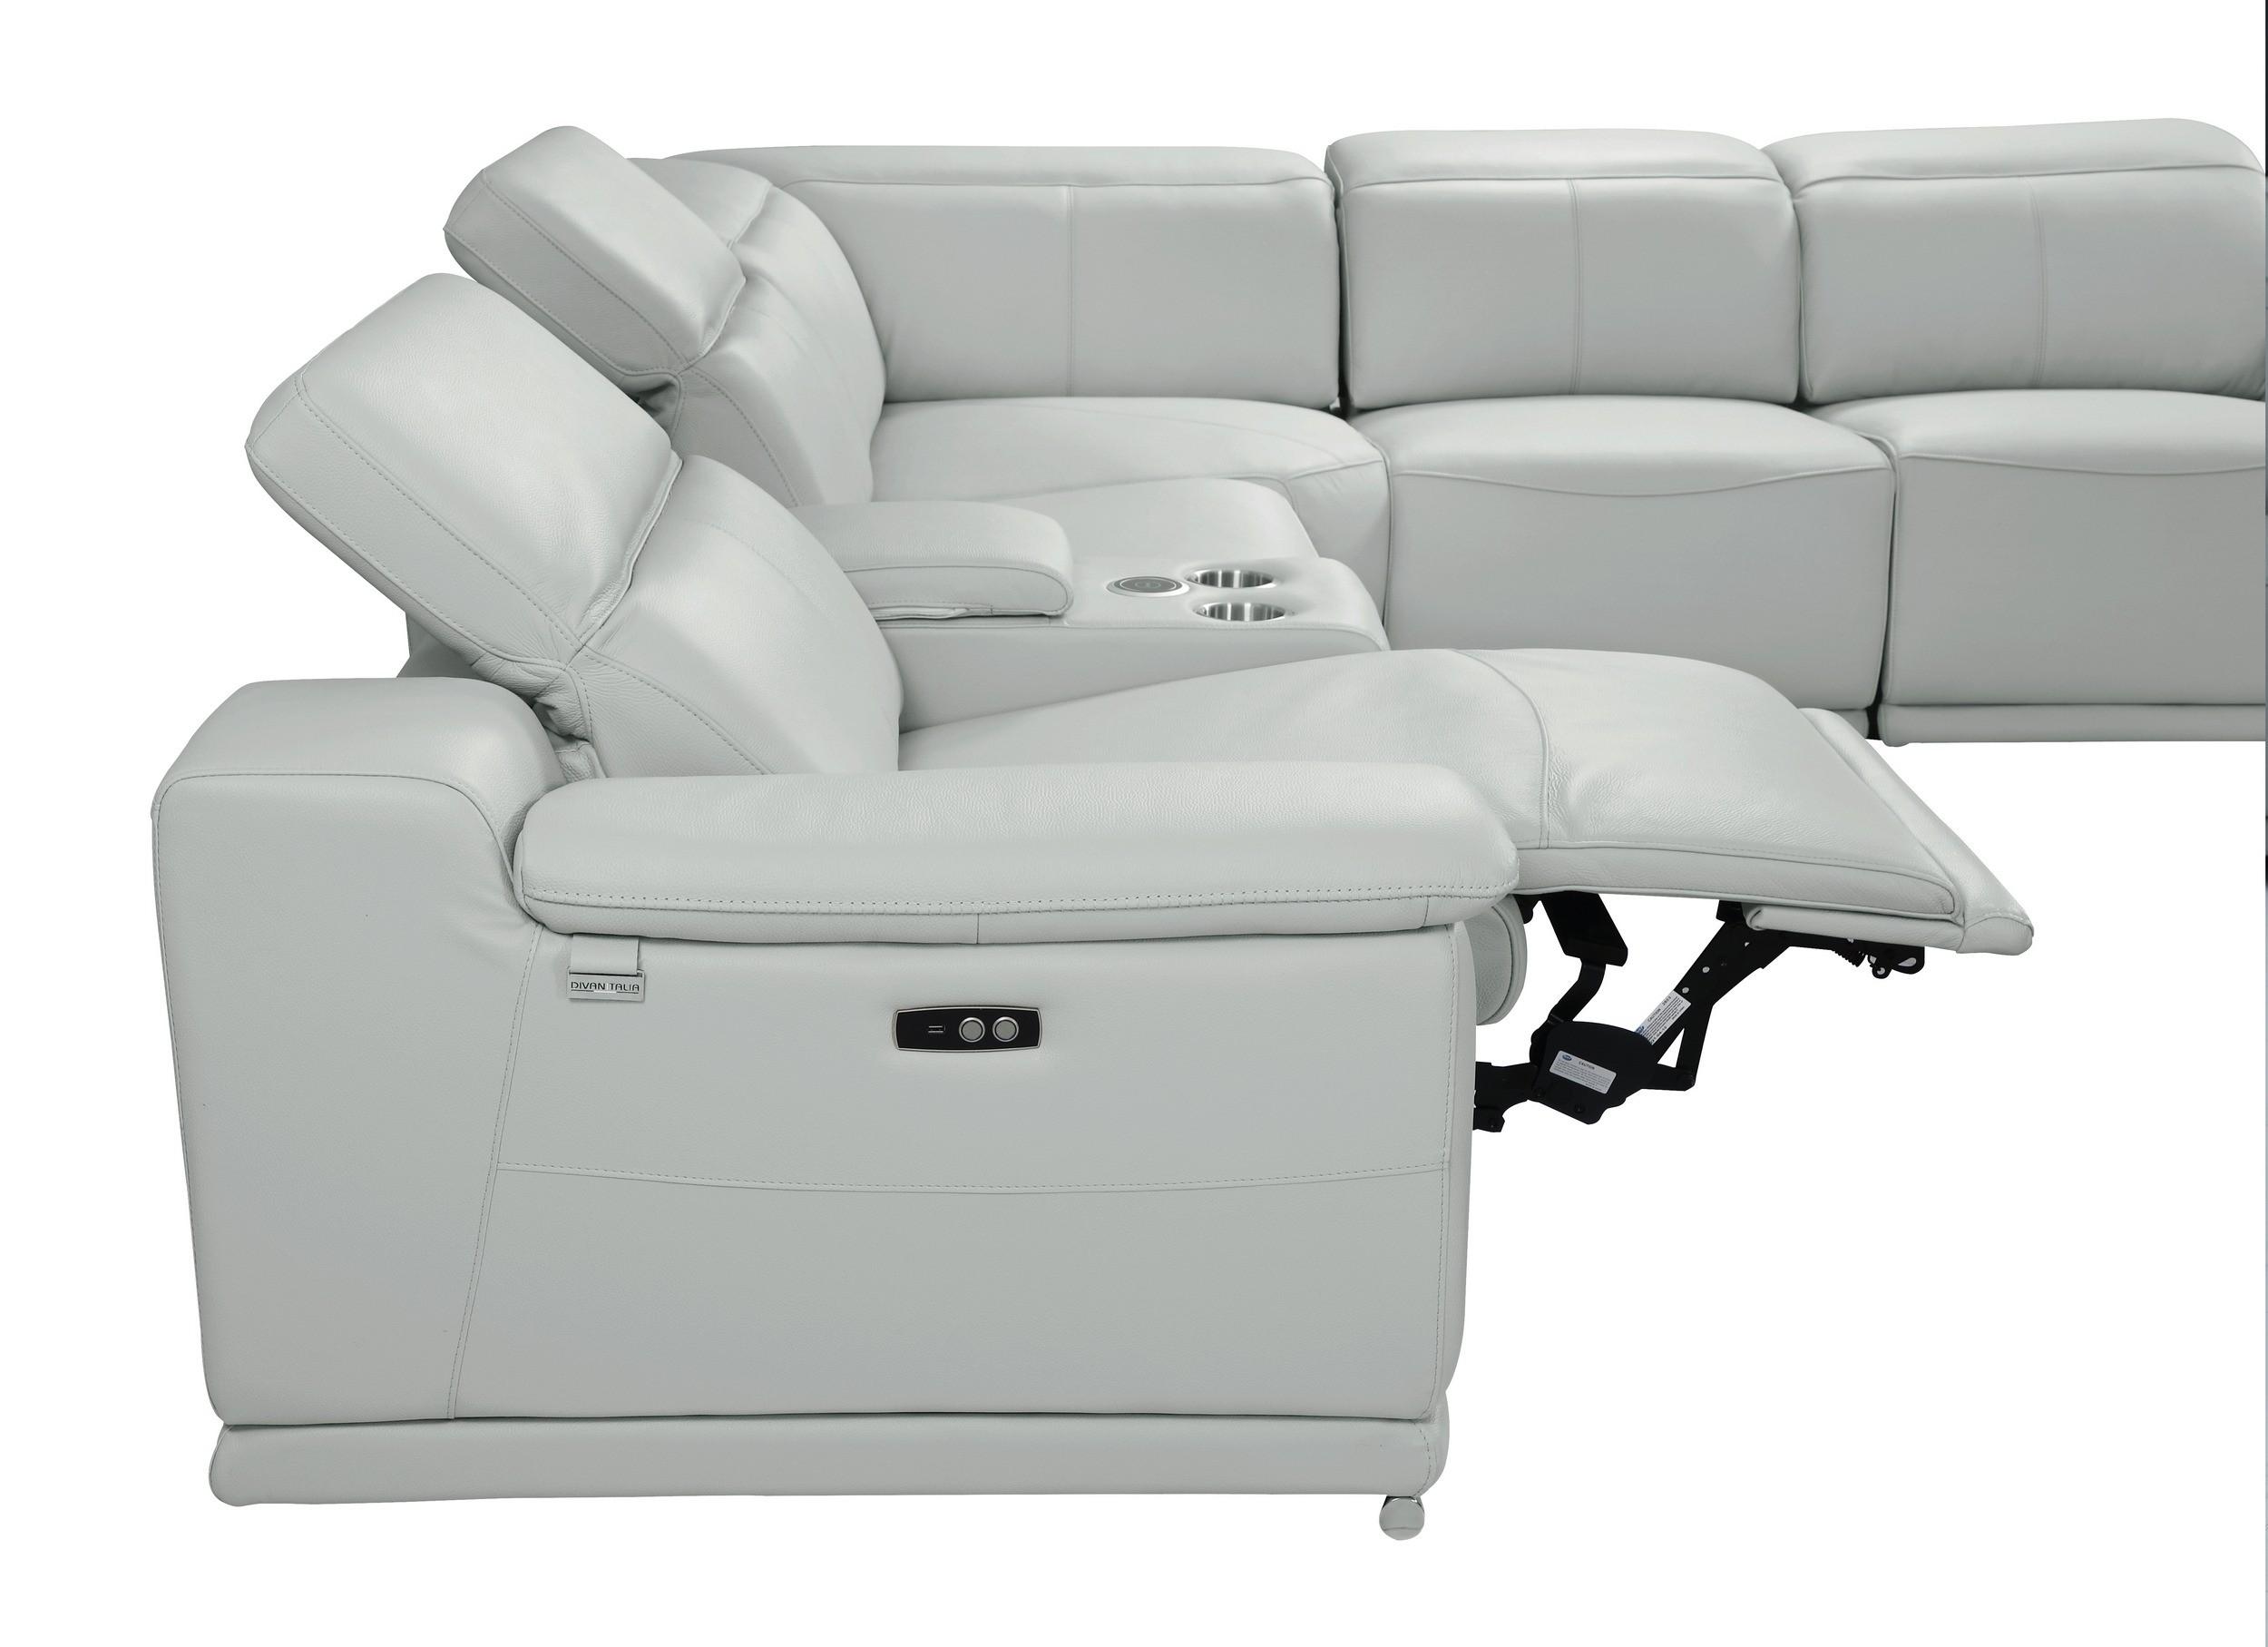 

    
9762-LT_GRAY-4PWR-7PC LIGHT GRAY 4-Power Reclining 7PC Sectional w/ 1-Console 9762 Global United
